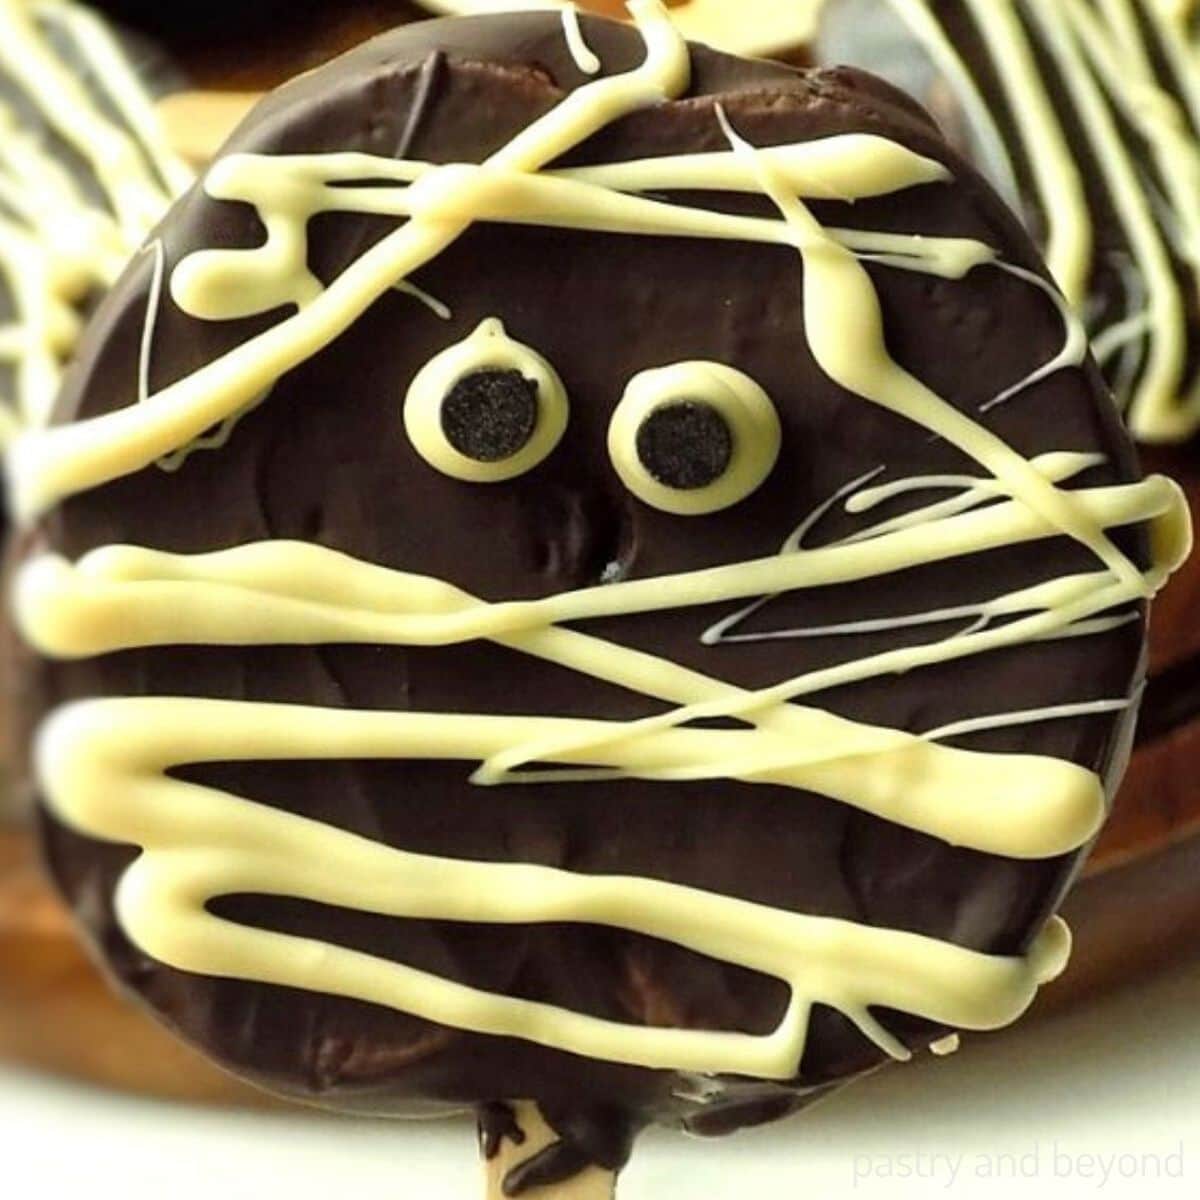 Halloween Chocolate Covered Apple Slices